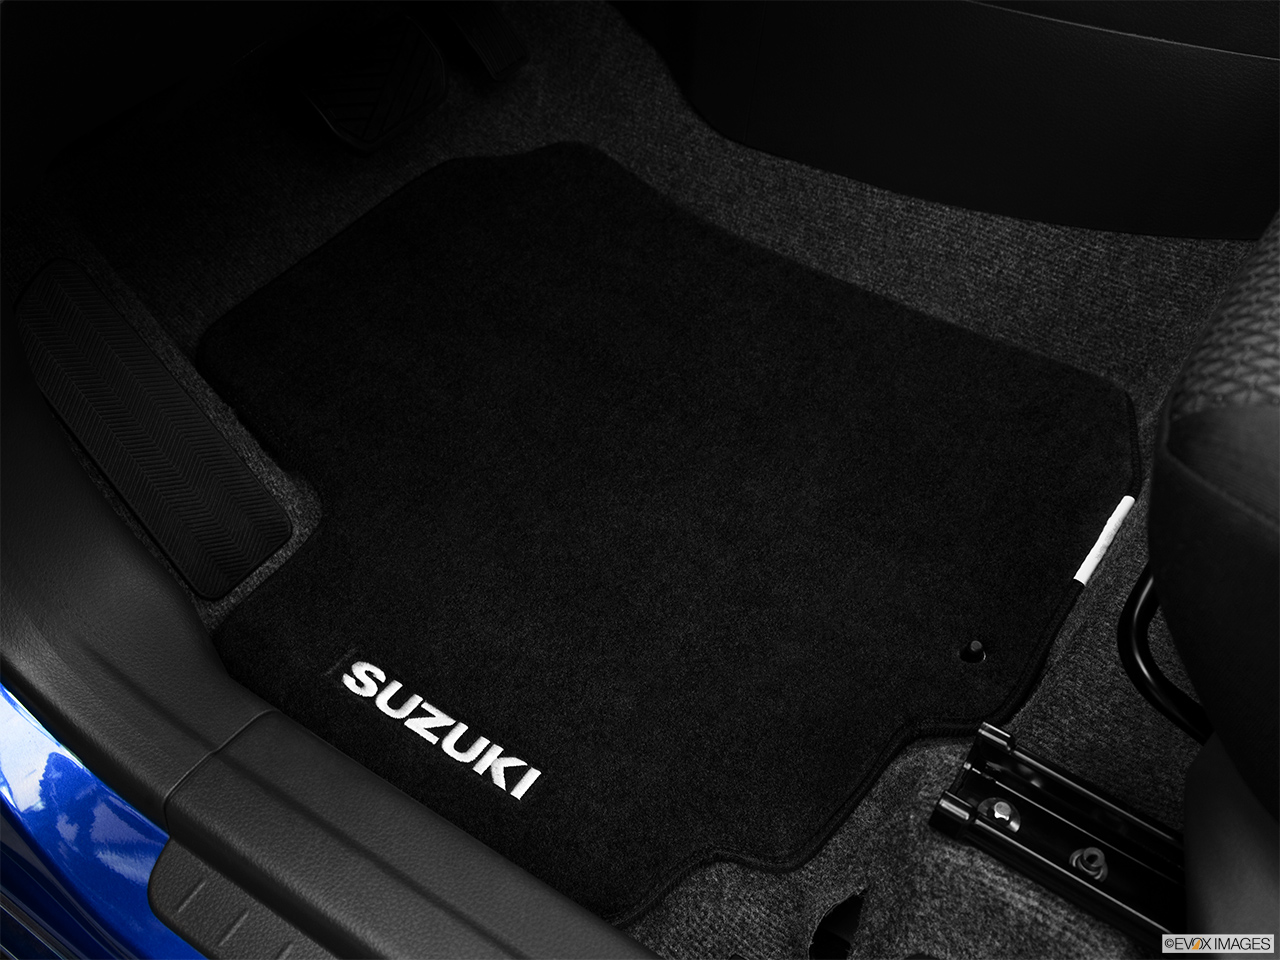 2013 Suzuki SX4 AWD Crossover Premium AT AWD Driver's floor mat and pedals. Mid-seat level from outside looking in. 